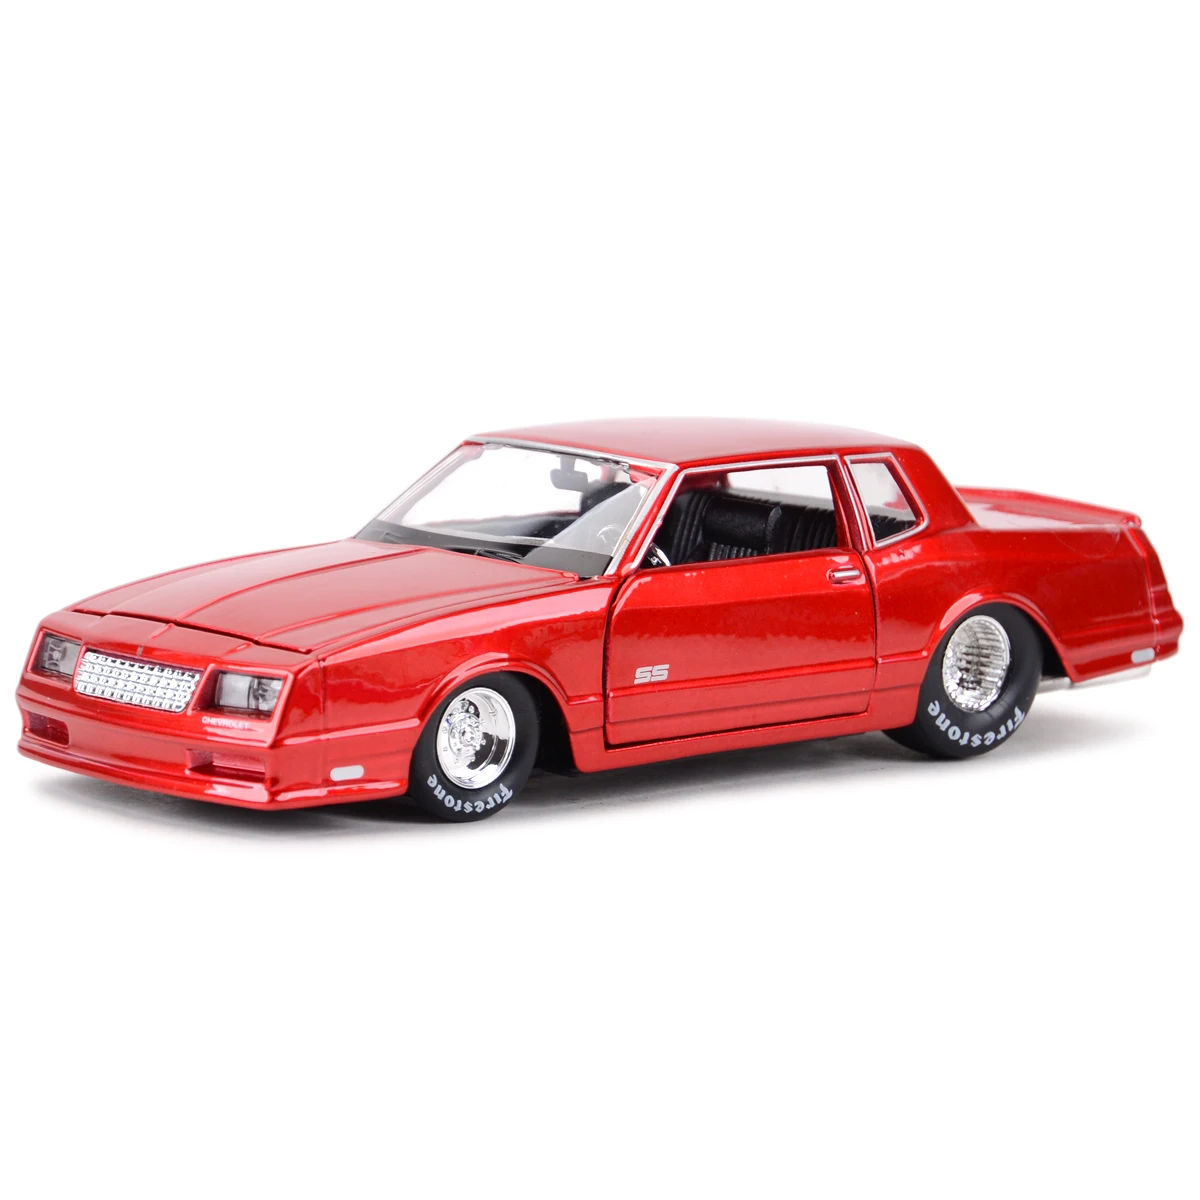 

Maisto 1:24 1986 Chevrolet Monte Carlo SS Static Die Cast Vehicles Collectible Model Sports Car Toys